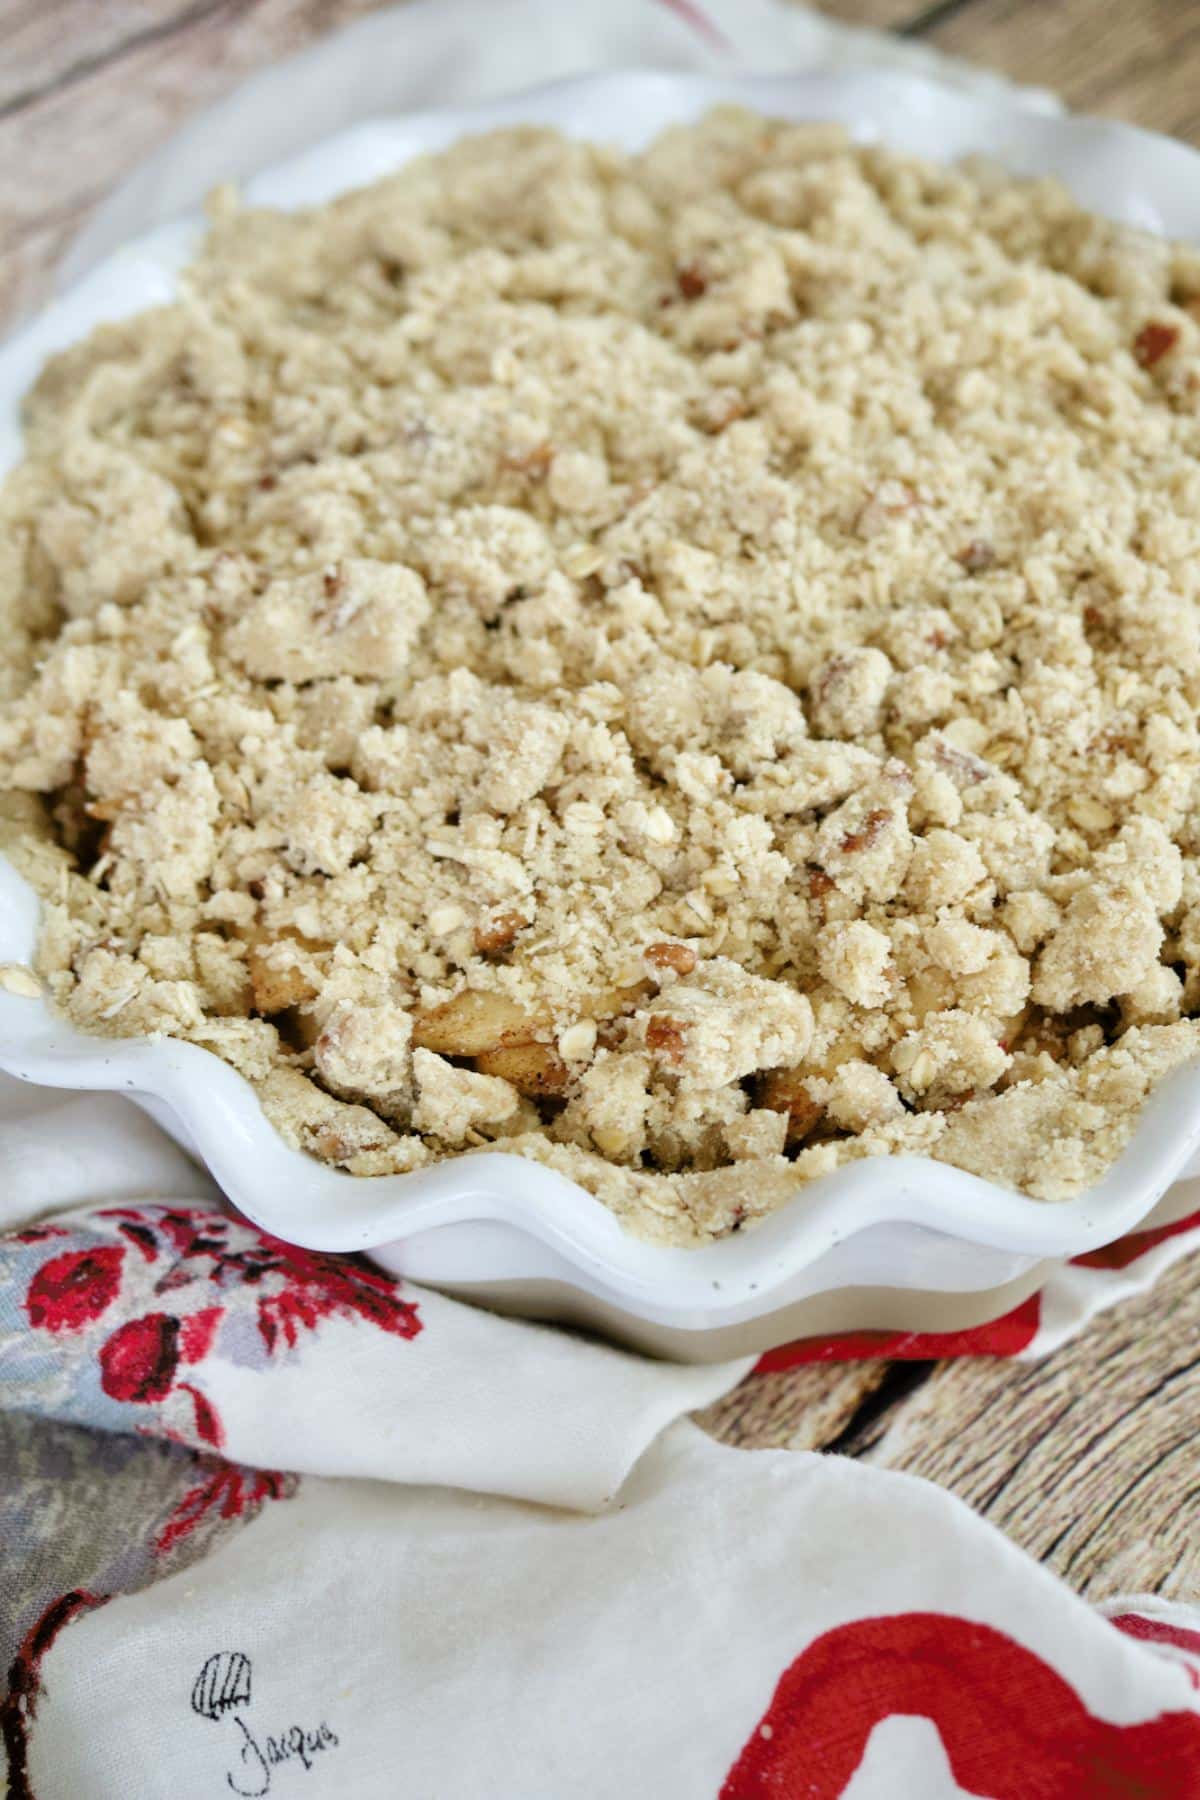 Crumb topping on apple pie recipe.